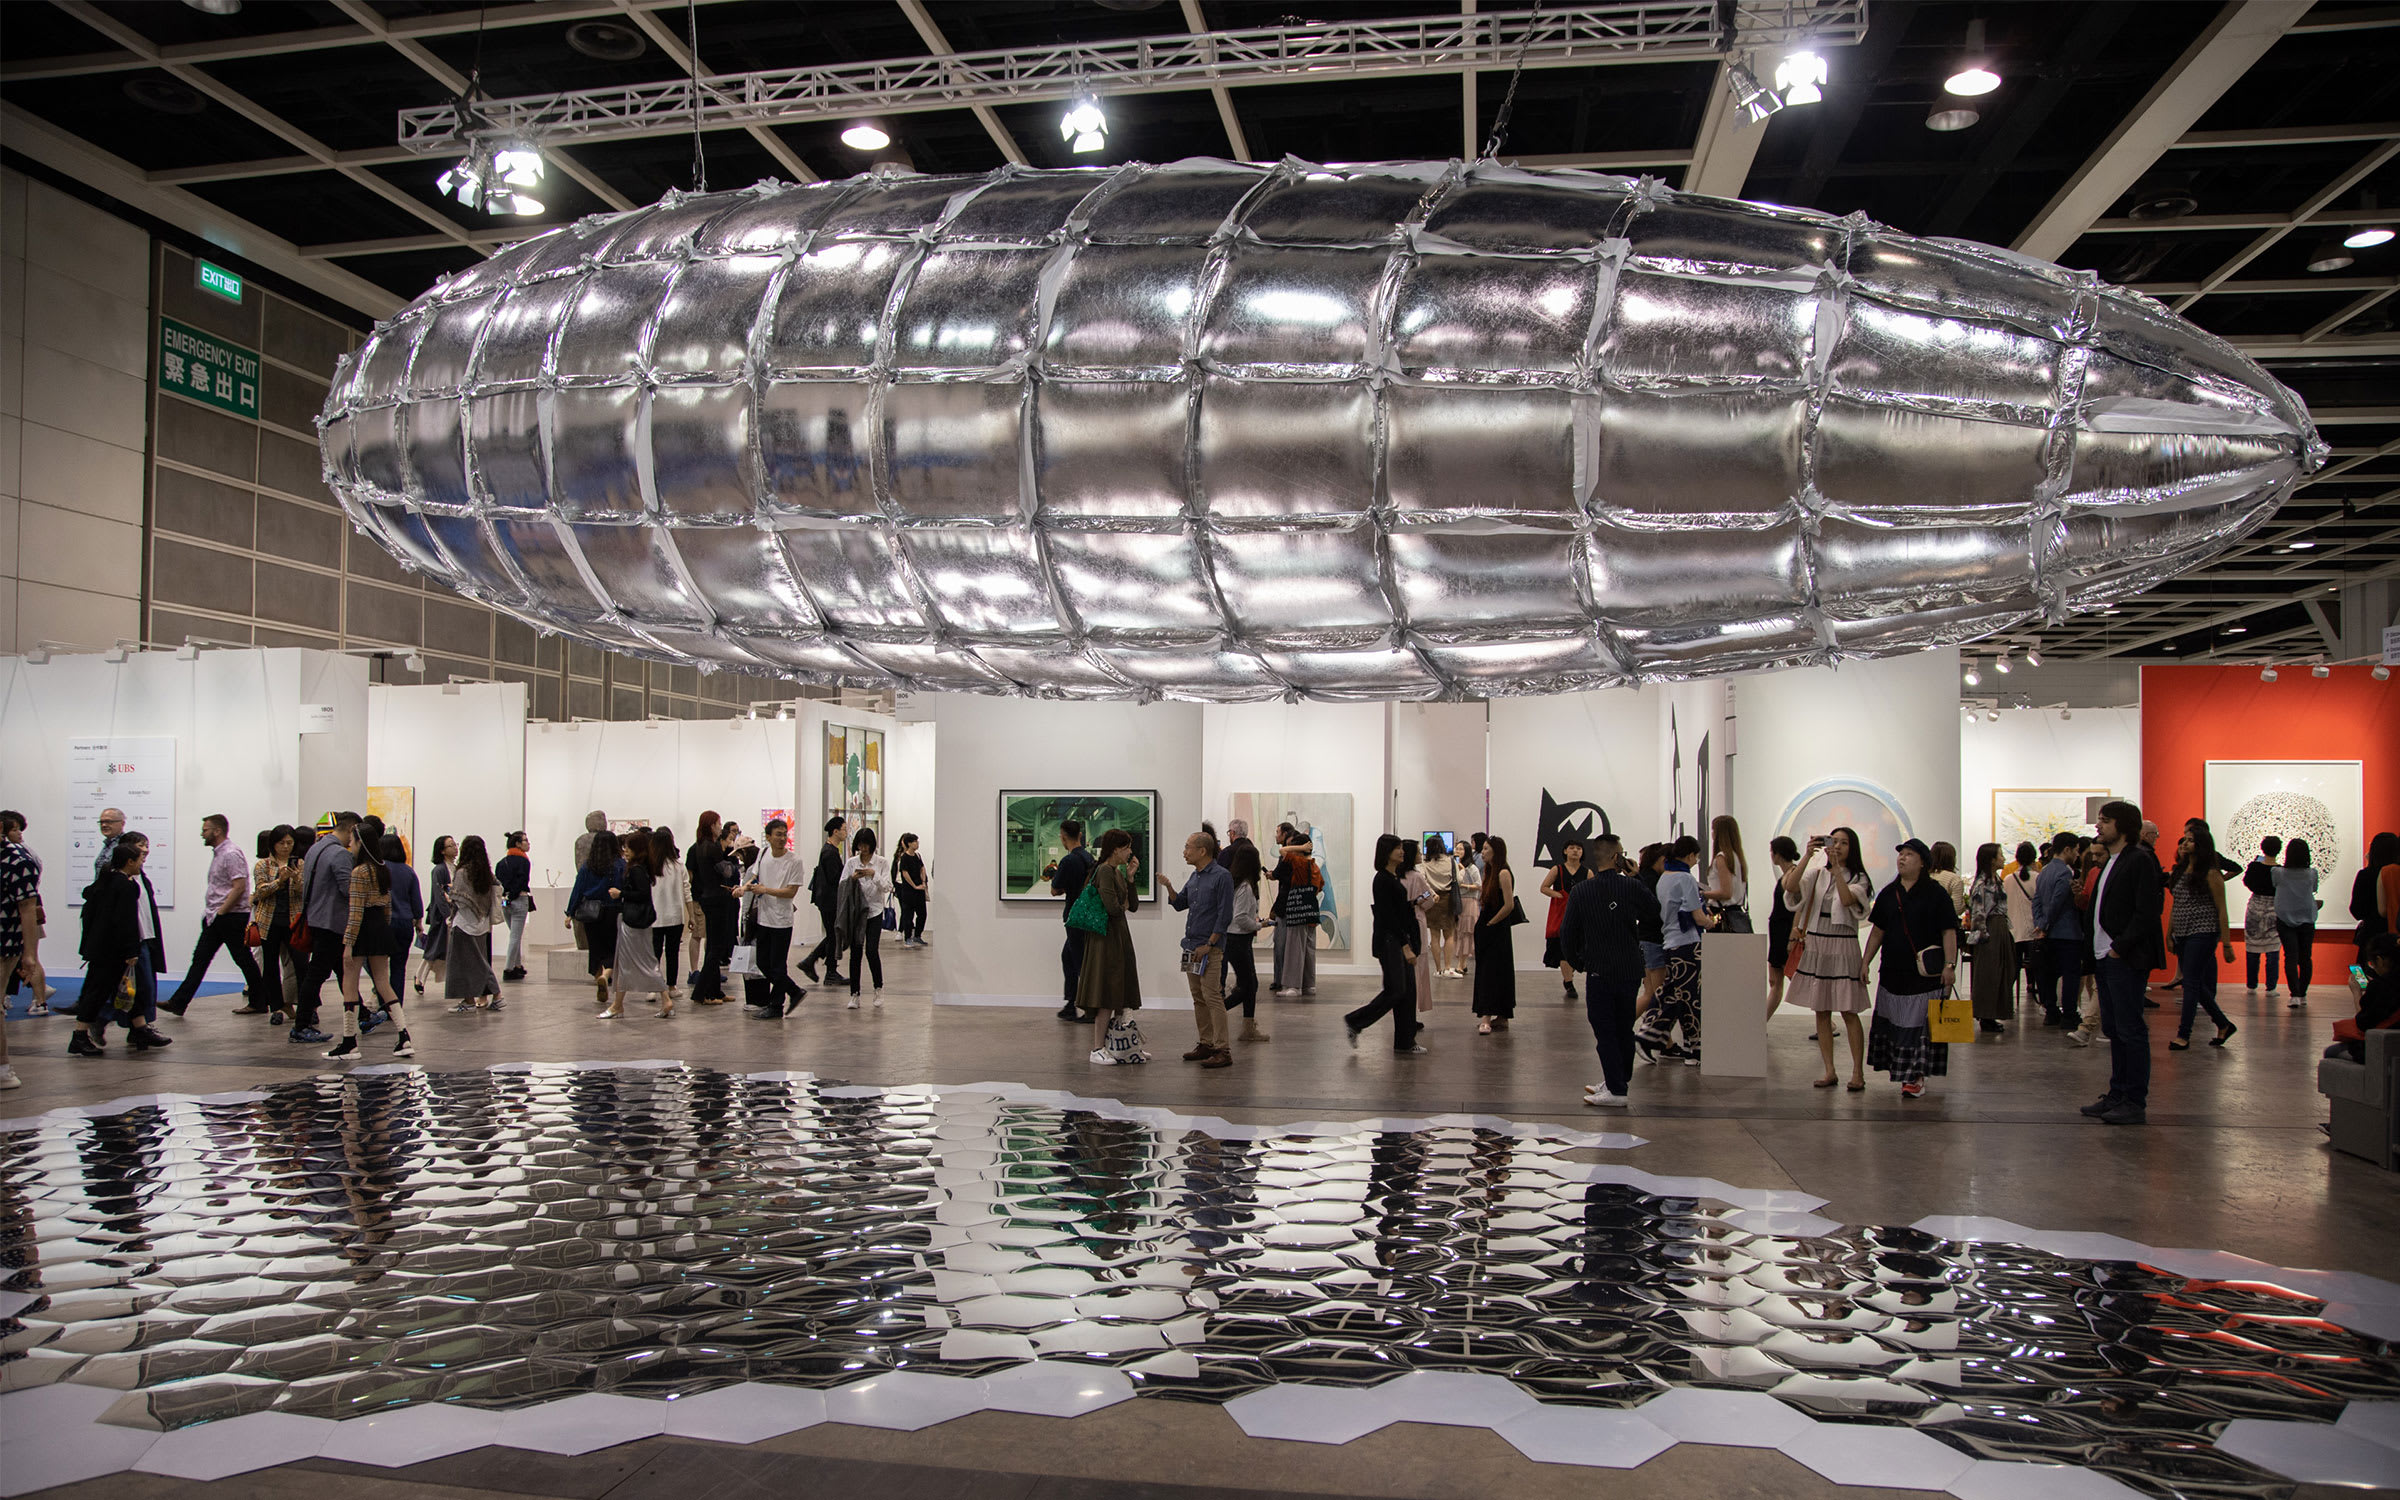 Lee Bul's sculpture Willing To Be Vulnerable – Metalized Balloon, floating above the show's visitors.